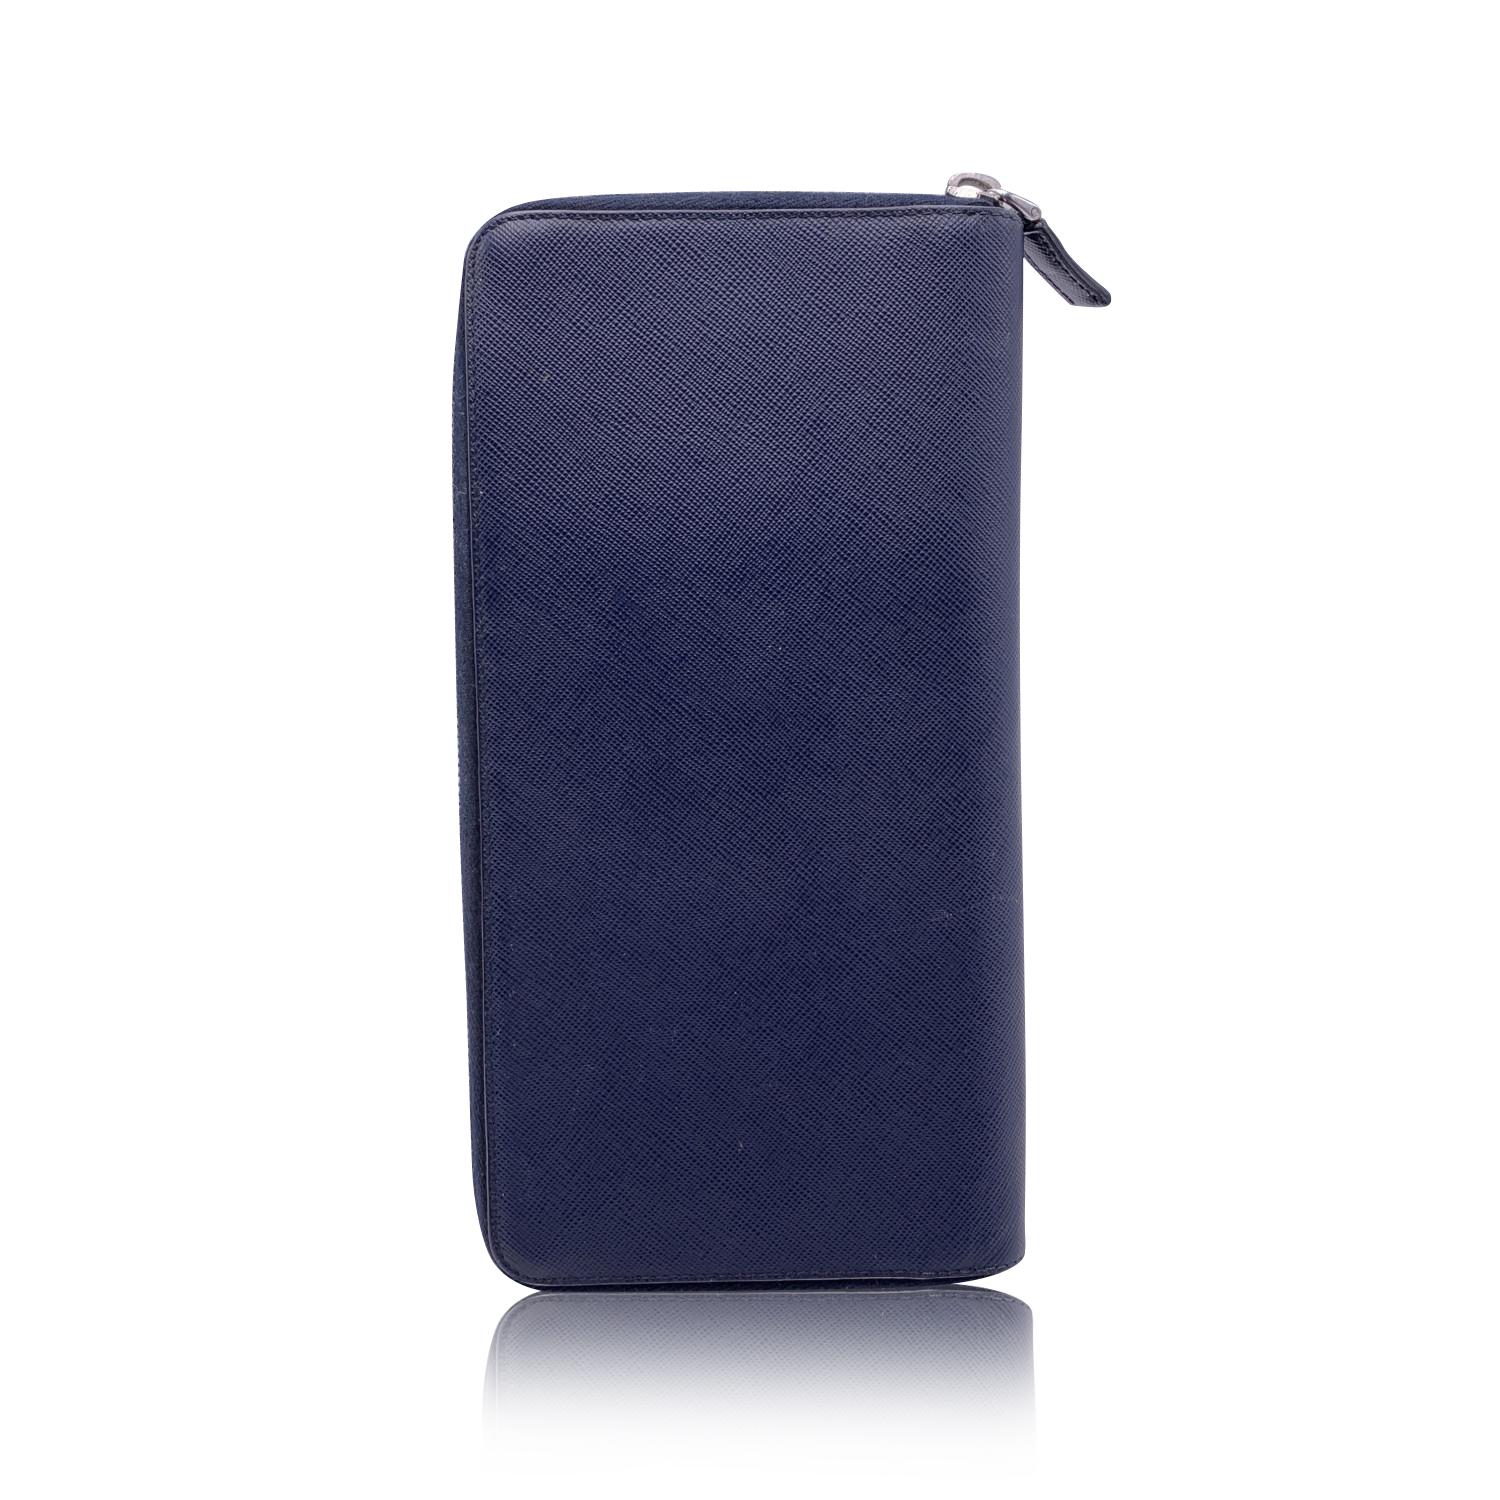 Prada travel wallet in blue 'Saffiano' leather. Silver metal PRADA logo lettering. Wrap-around zipper. 1 bill compartments & 1 middle zip compartment for coins. 17 credit card slots & 1 open pocket inside. 'Prada - Milano' engraved on leather